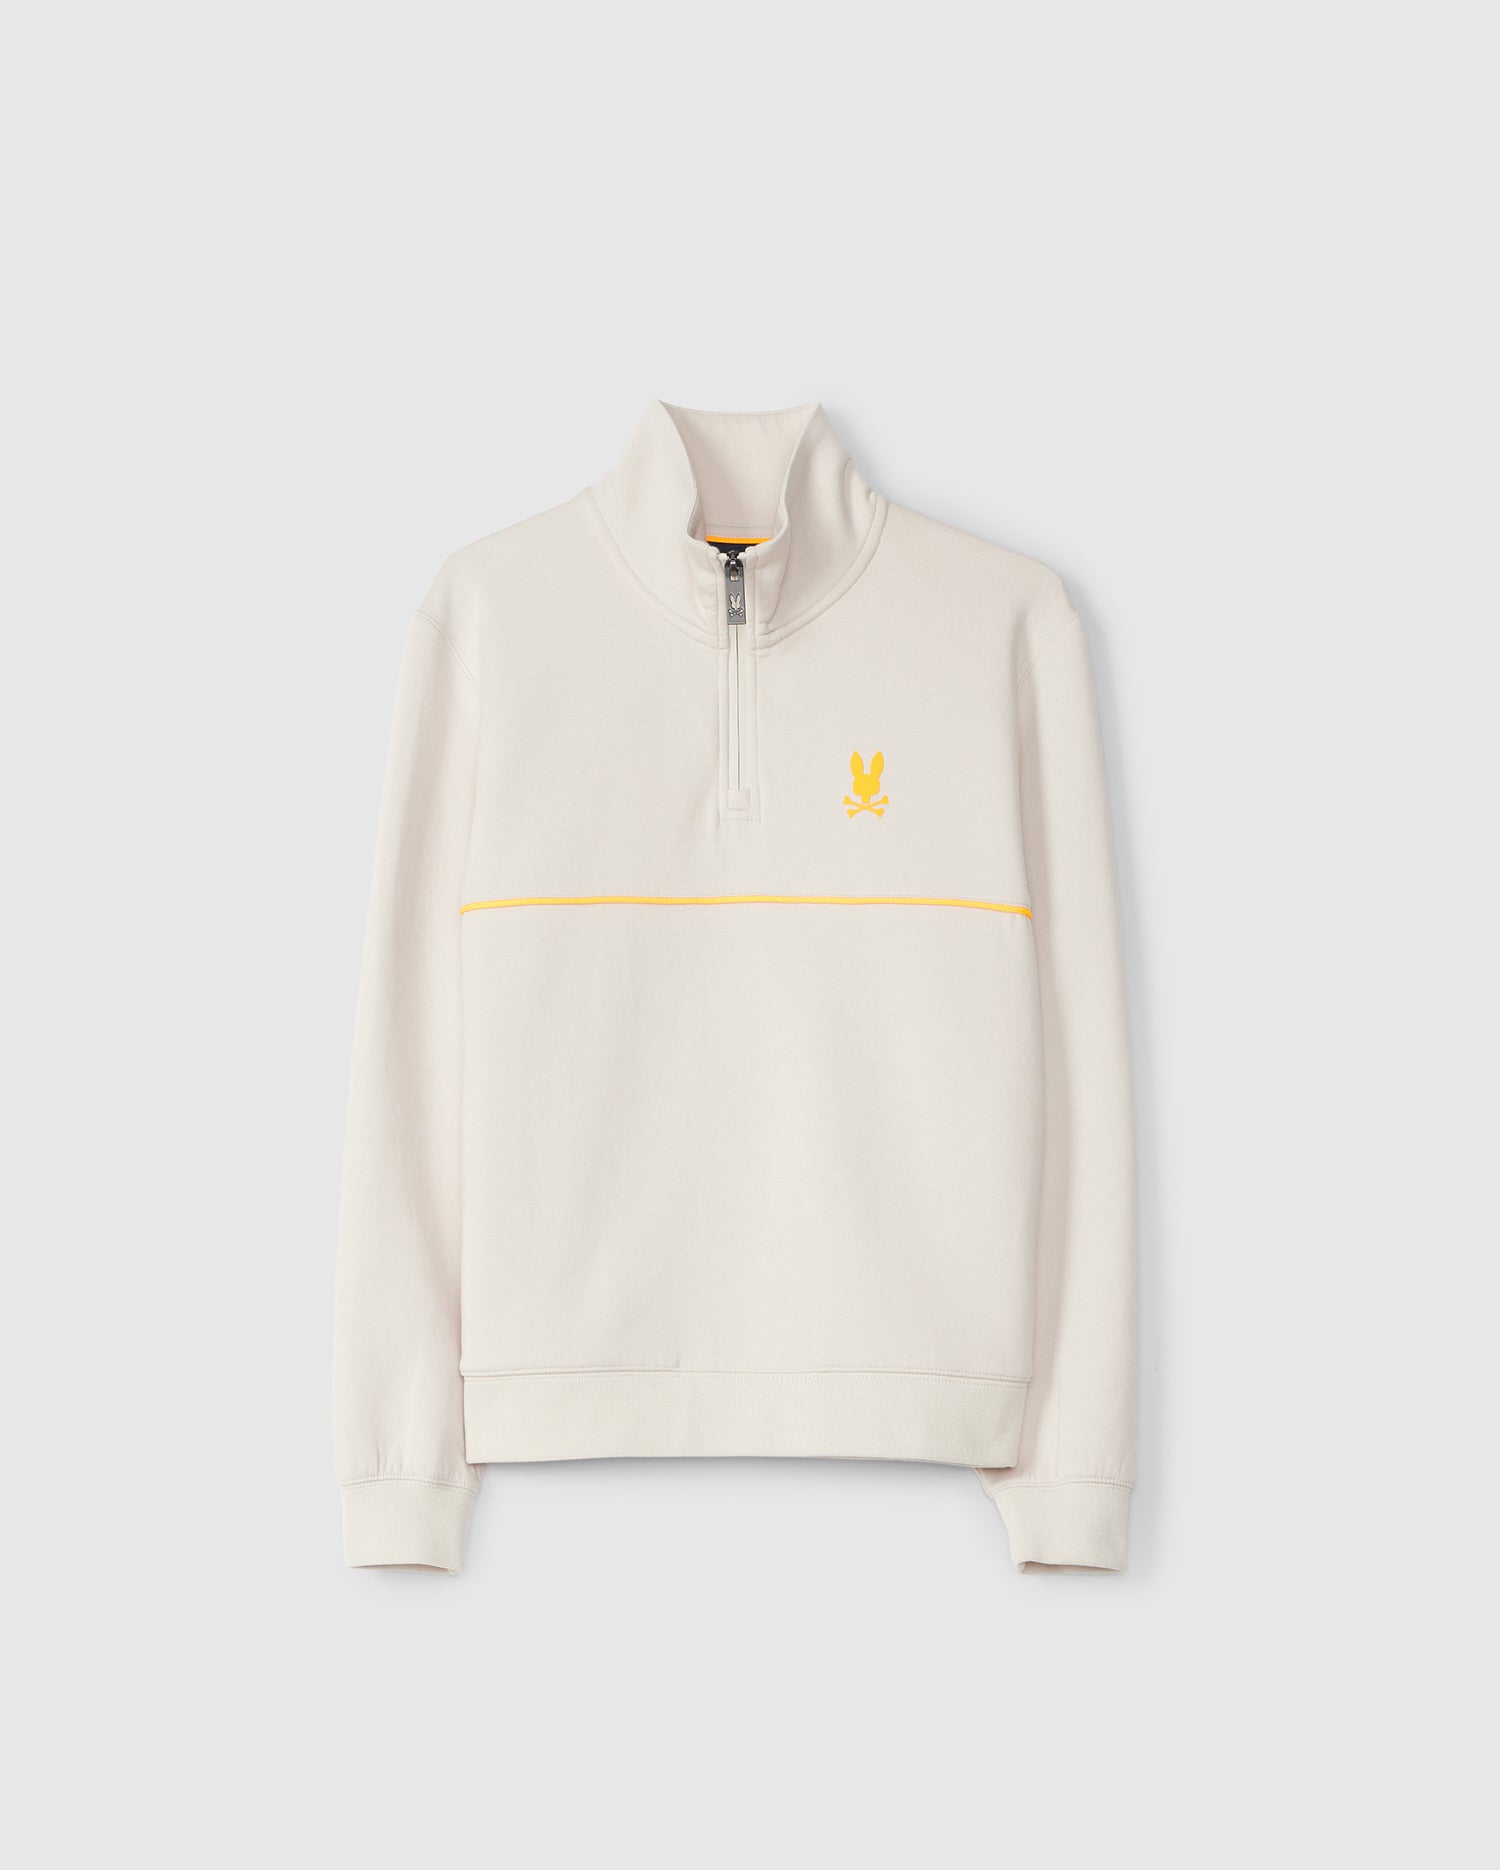 A cream-colored quarter-zip sweatshirt featuring a standing collar. Crafted from soft modal-blend fleece, the KIDS LEON HALF ZIP - B0S204B200 by Psycho Bunny has a zipper down the top half and a yellow stripe running horizontally across the chest, with a yellow embroidered rabbit emblem on the left chest area.